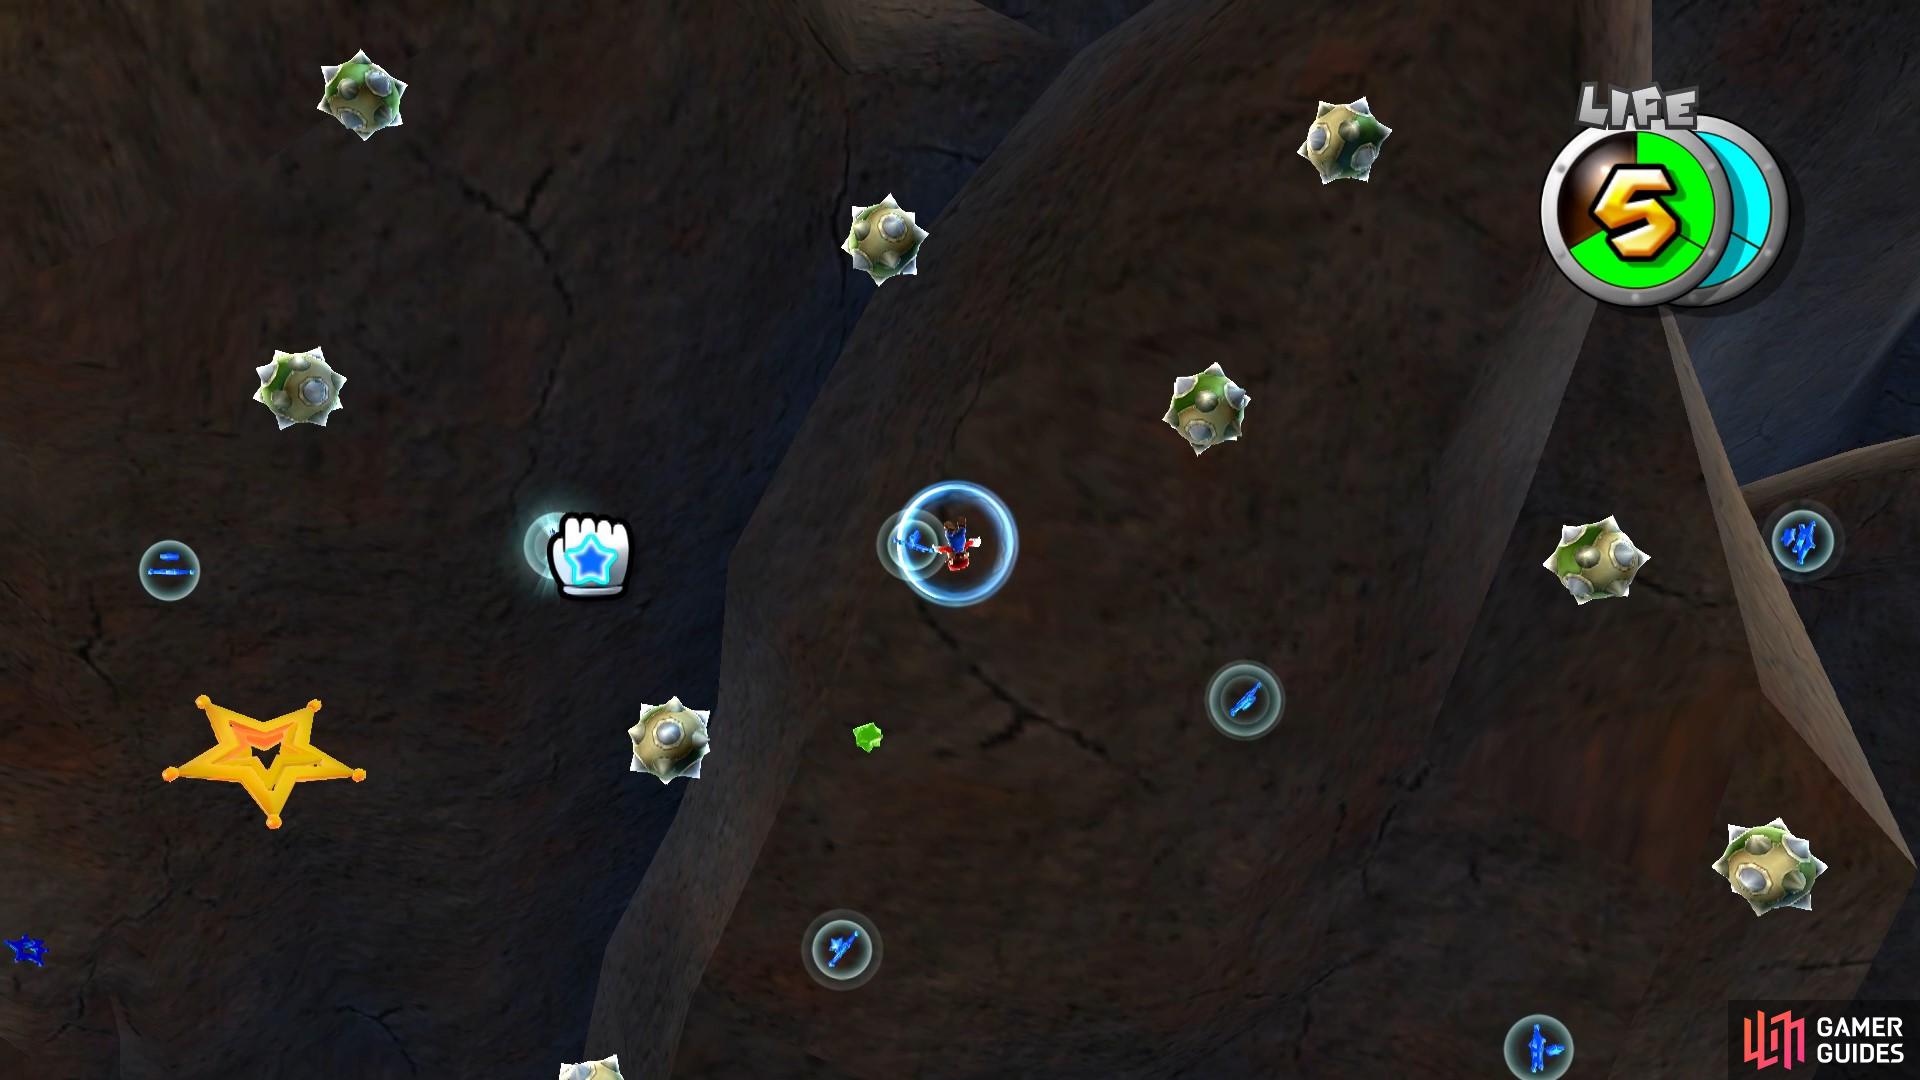 You’ll need to navigate around lots of Space Mines in this level.